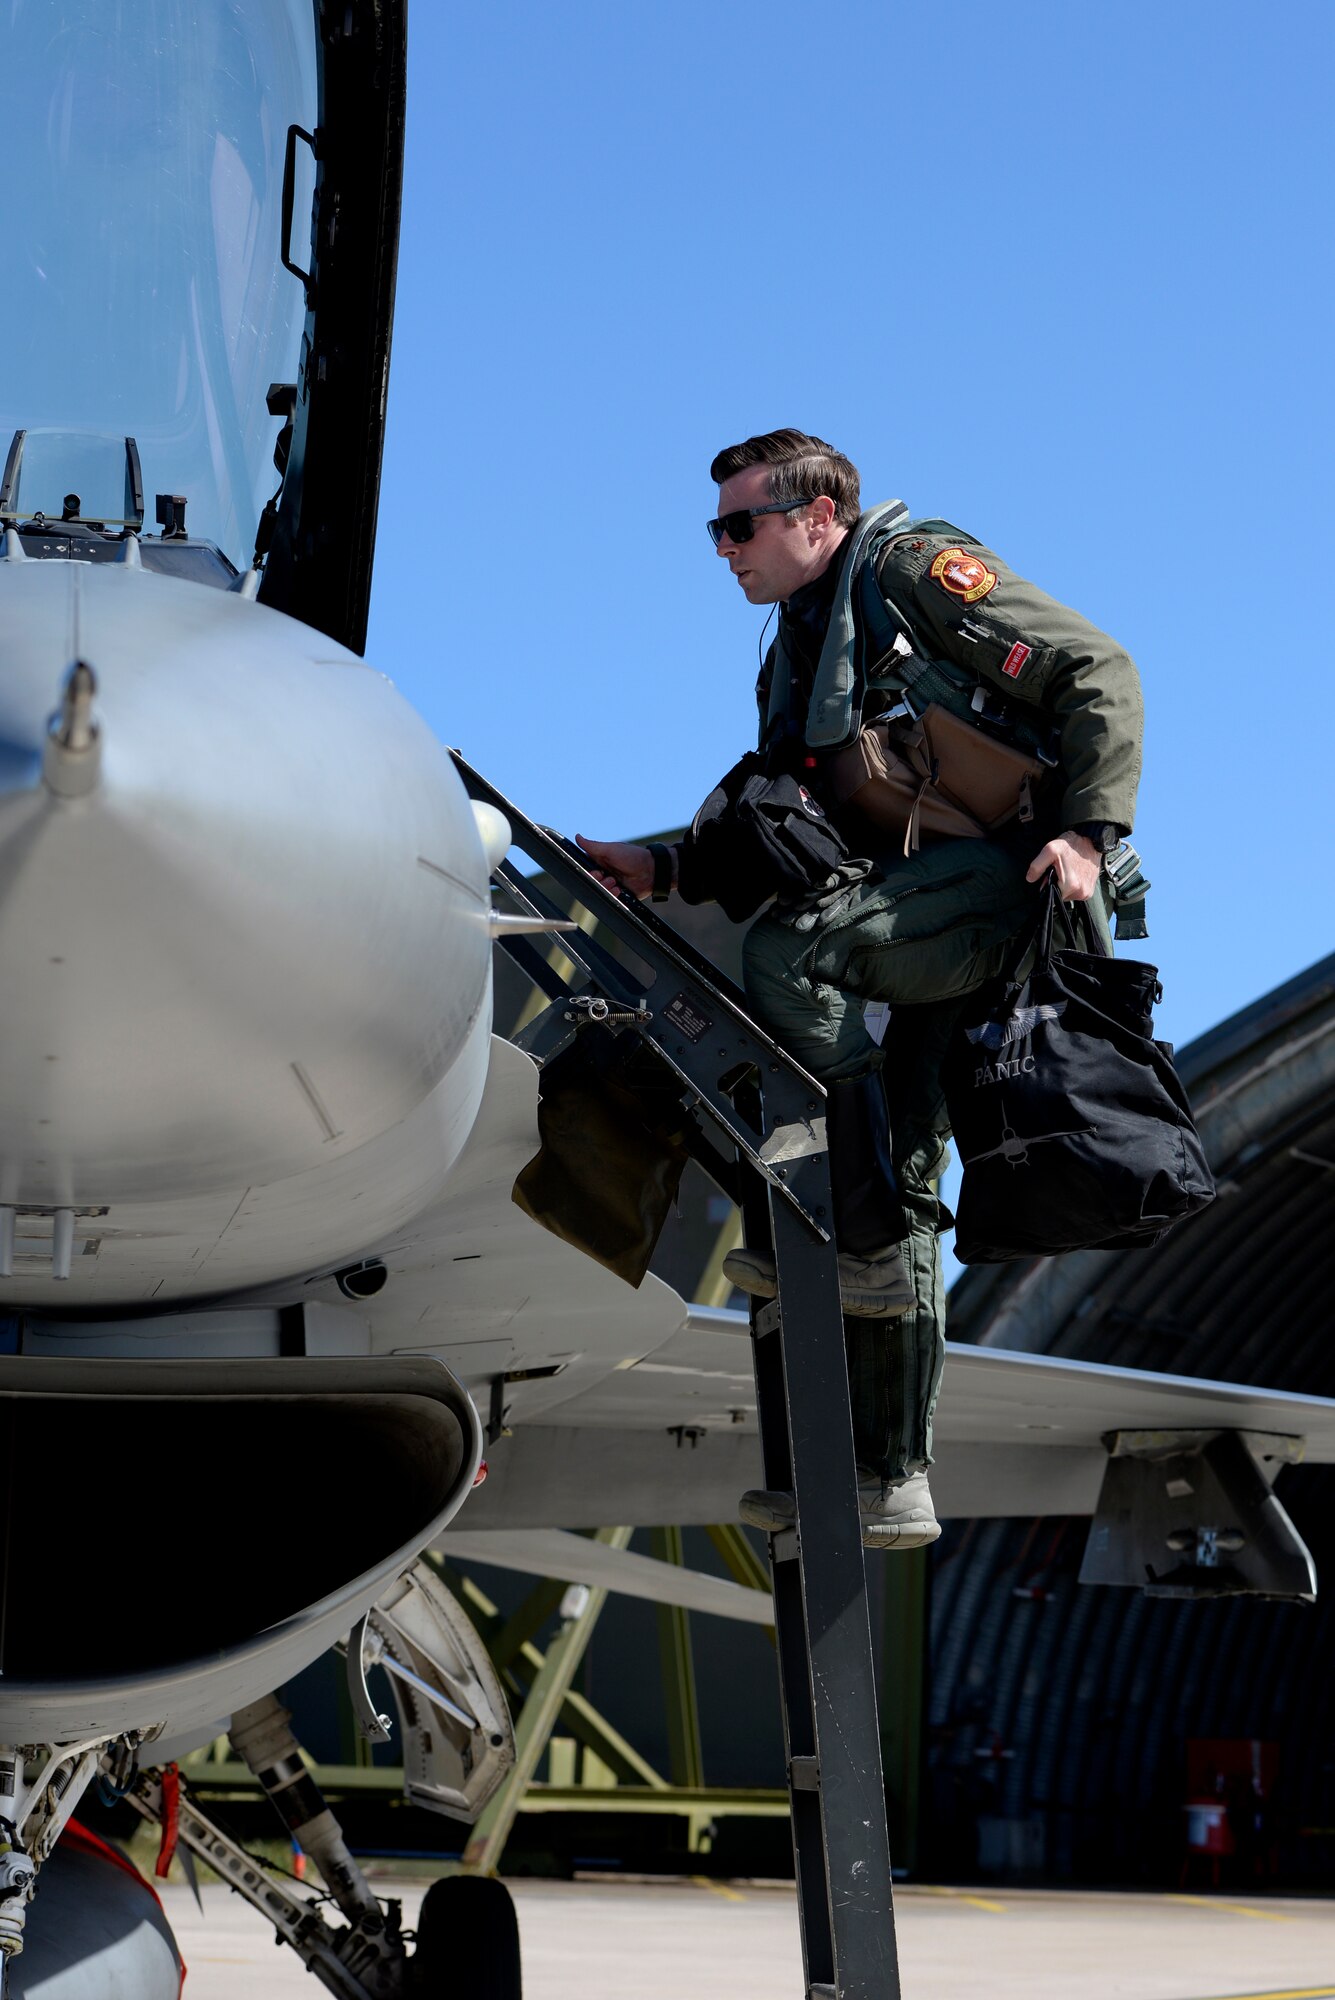 U.S. Air Force Maj. Kevin Bunten, 480th Fighter Squadron Assistant Director of Operations, scales the ladder of his F-16 Fighting Falcon before flying a low-level training sortie at RAF Lossiemouth, Scotland, May 7, 2019, during exercise Formidable Shield. Formidable Shield is a U.S.-led exercise, conducted by Naval Striking and Support Forces NATO. The purpose of the training is to improve allied interoperability in a live-fire integrated air and missile defense exercise. (U.S. Air Force photo by Master Sgt. Austin M. May)